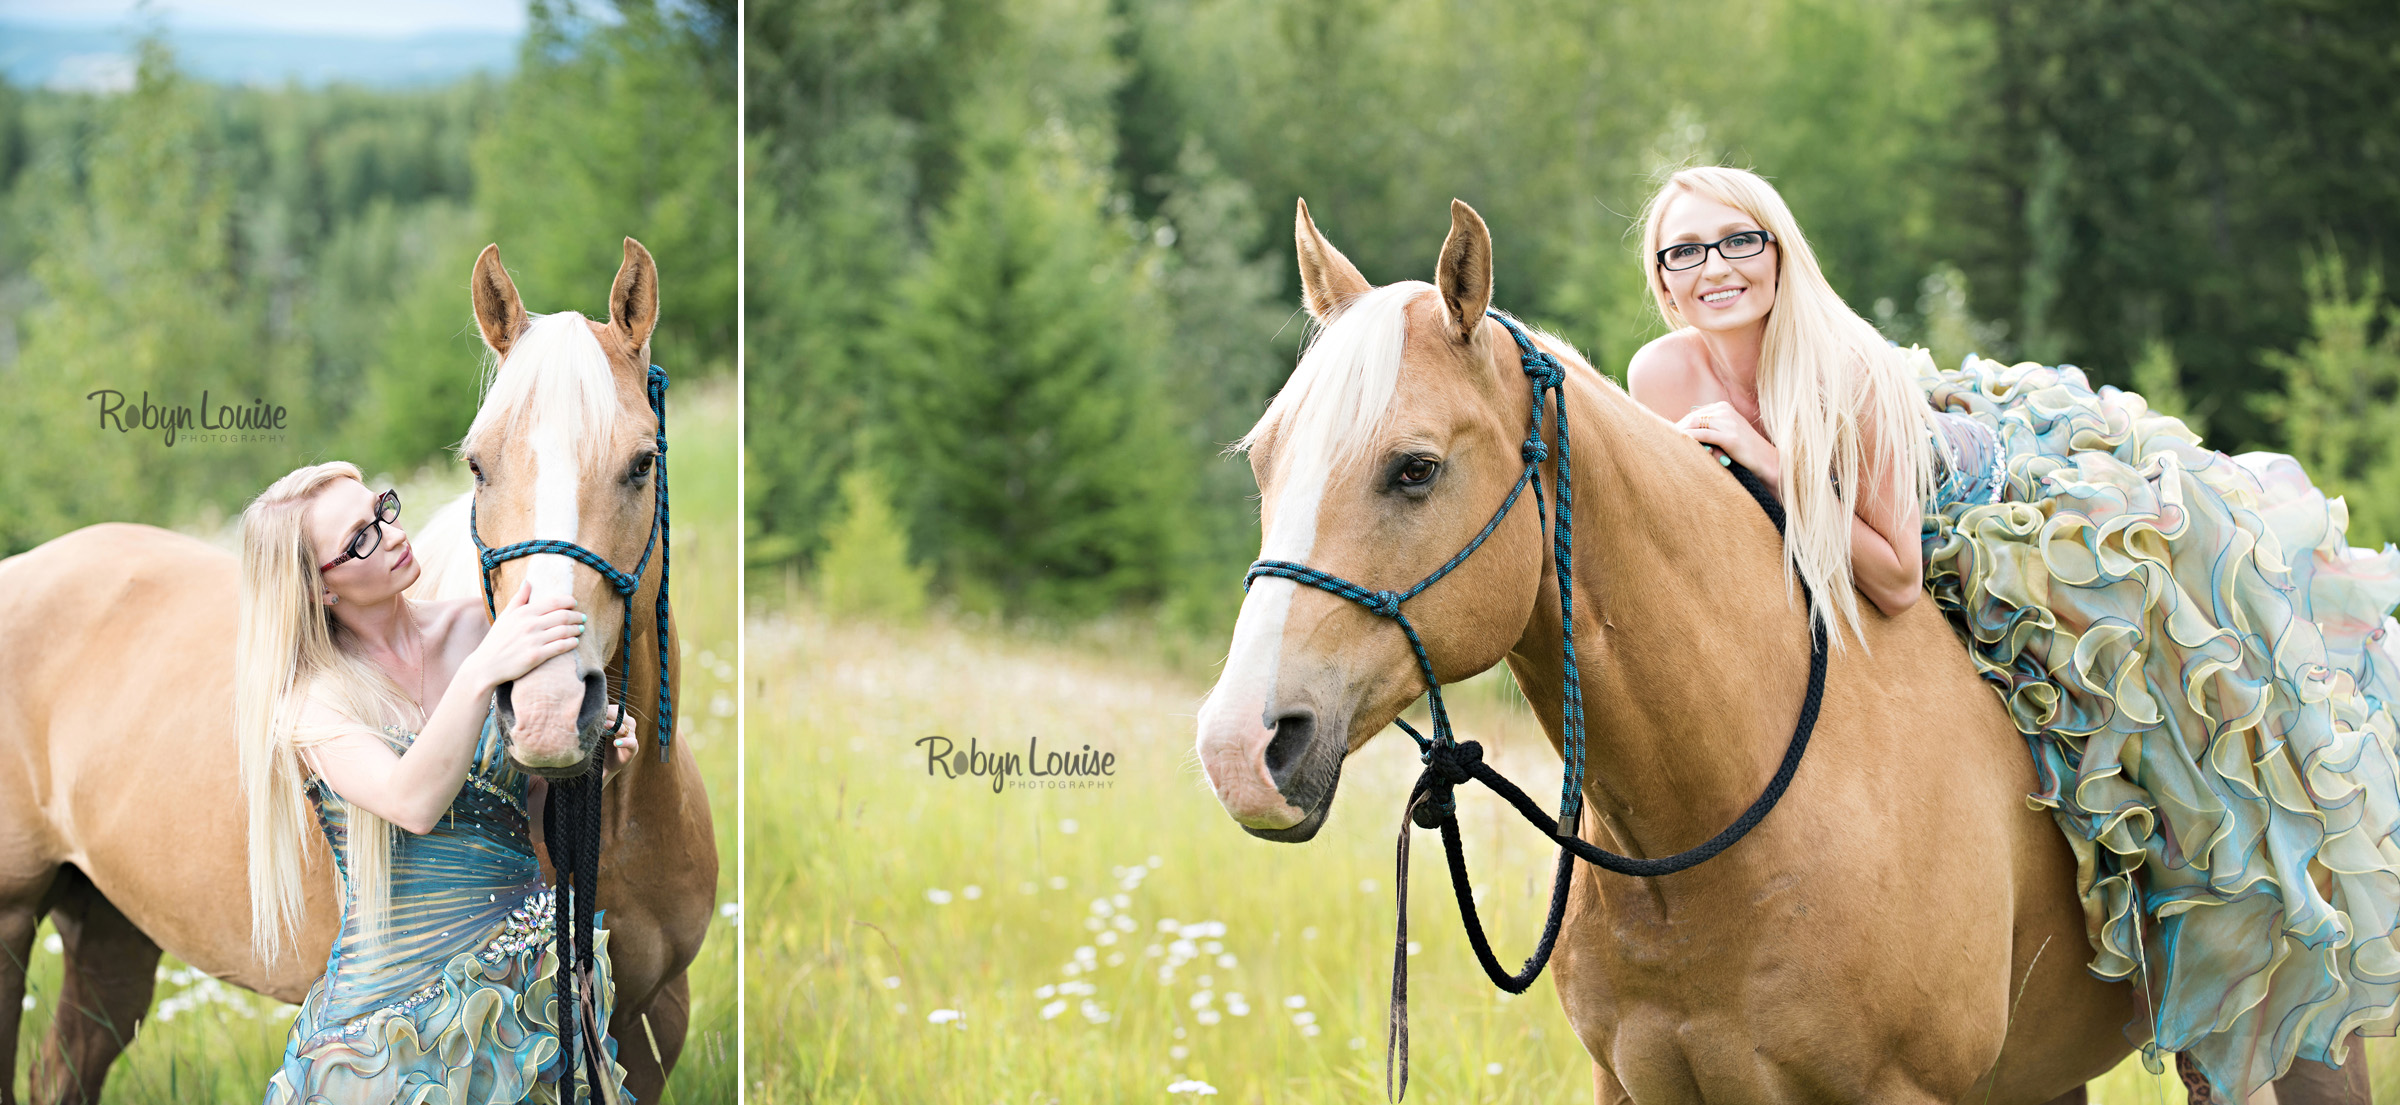 megan-and-horses-robyn-louise-photography0002